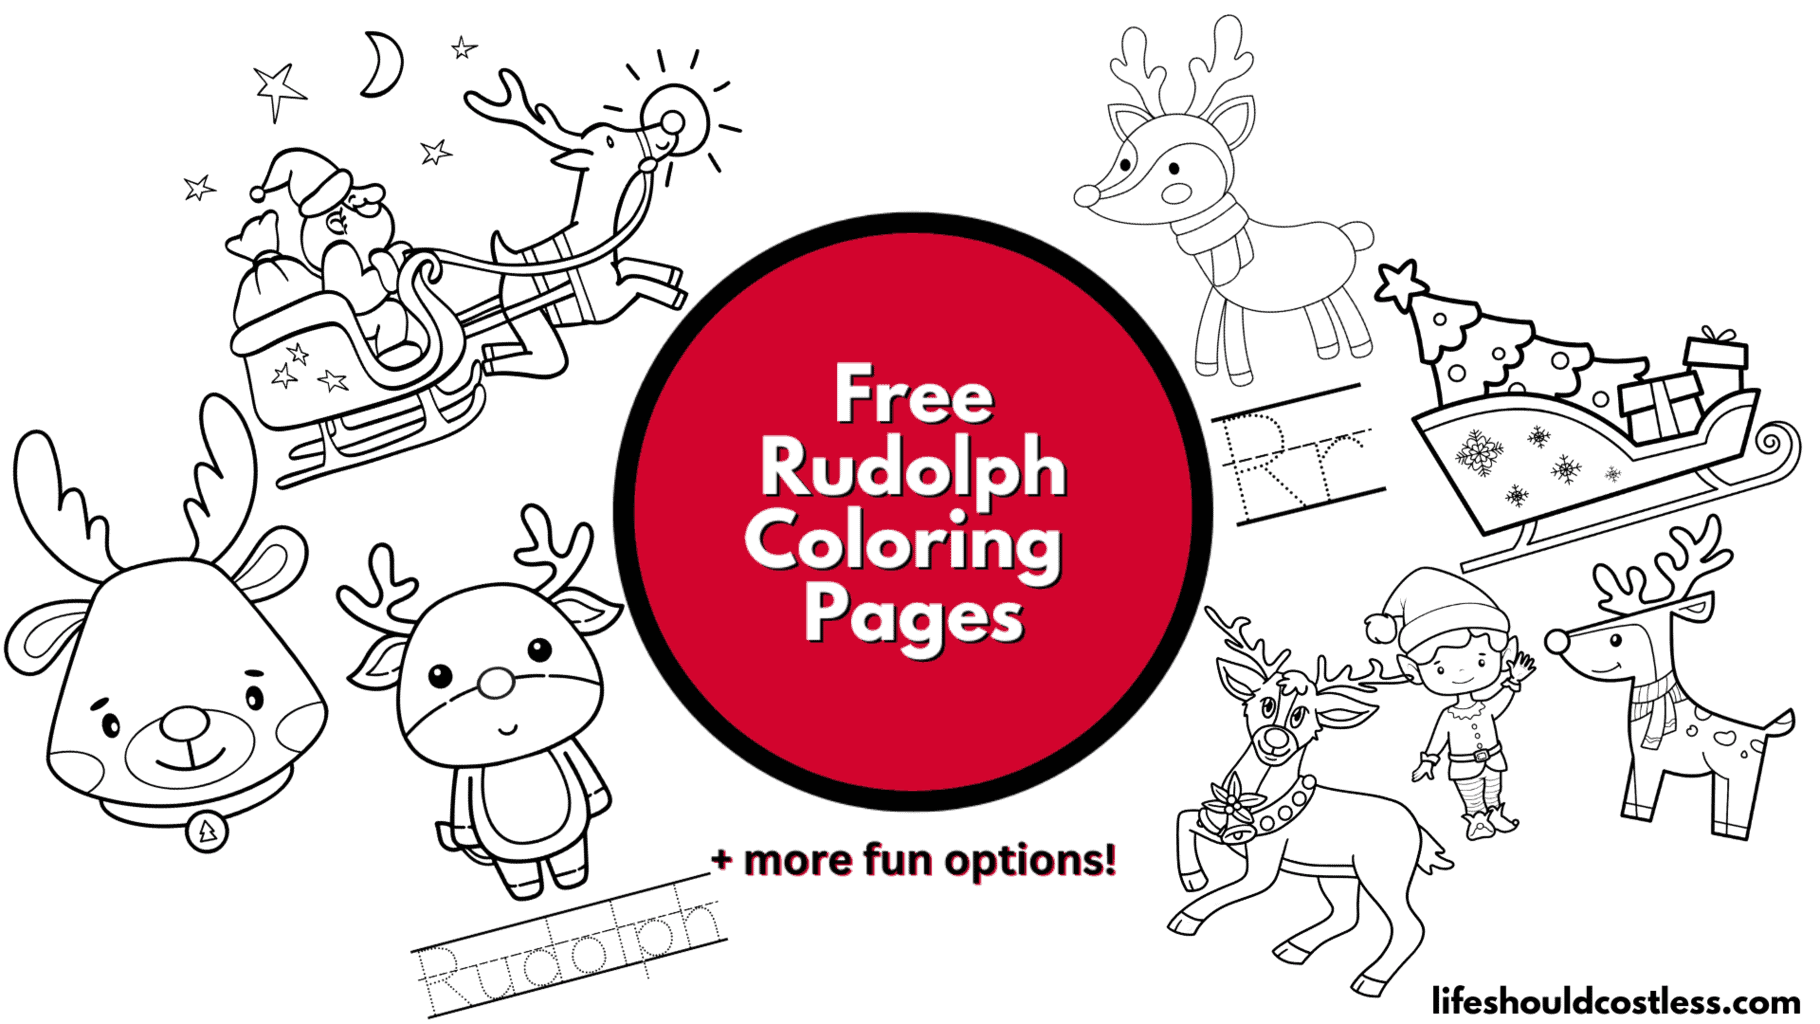 Rudolph coloring pages free printable pdf templates